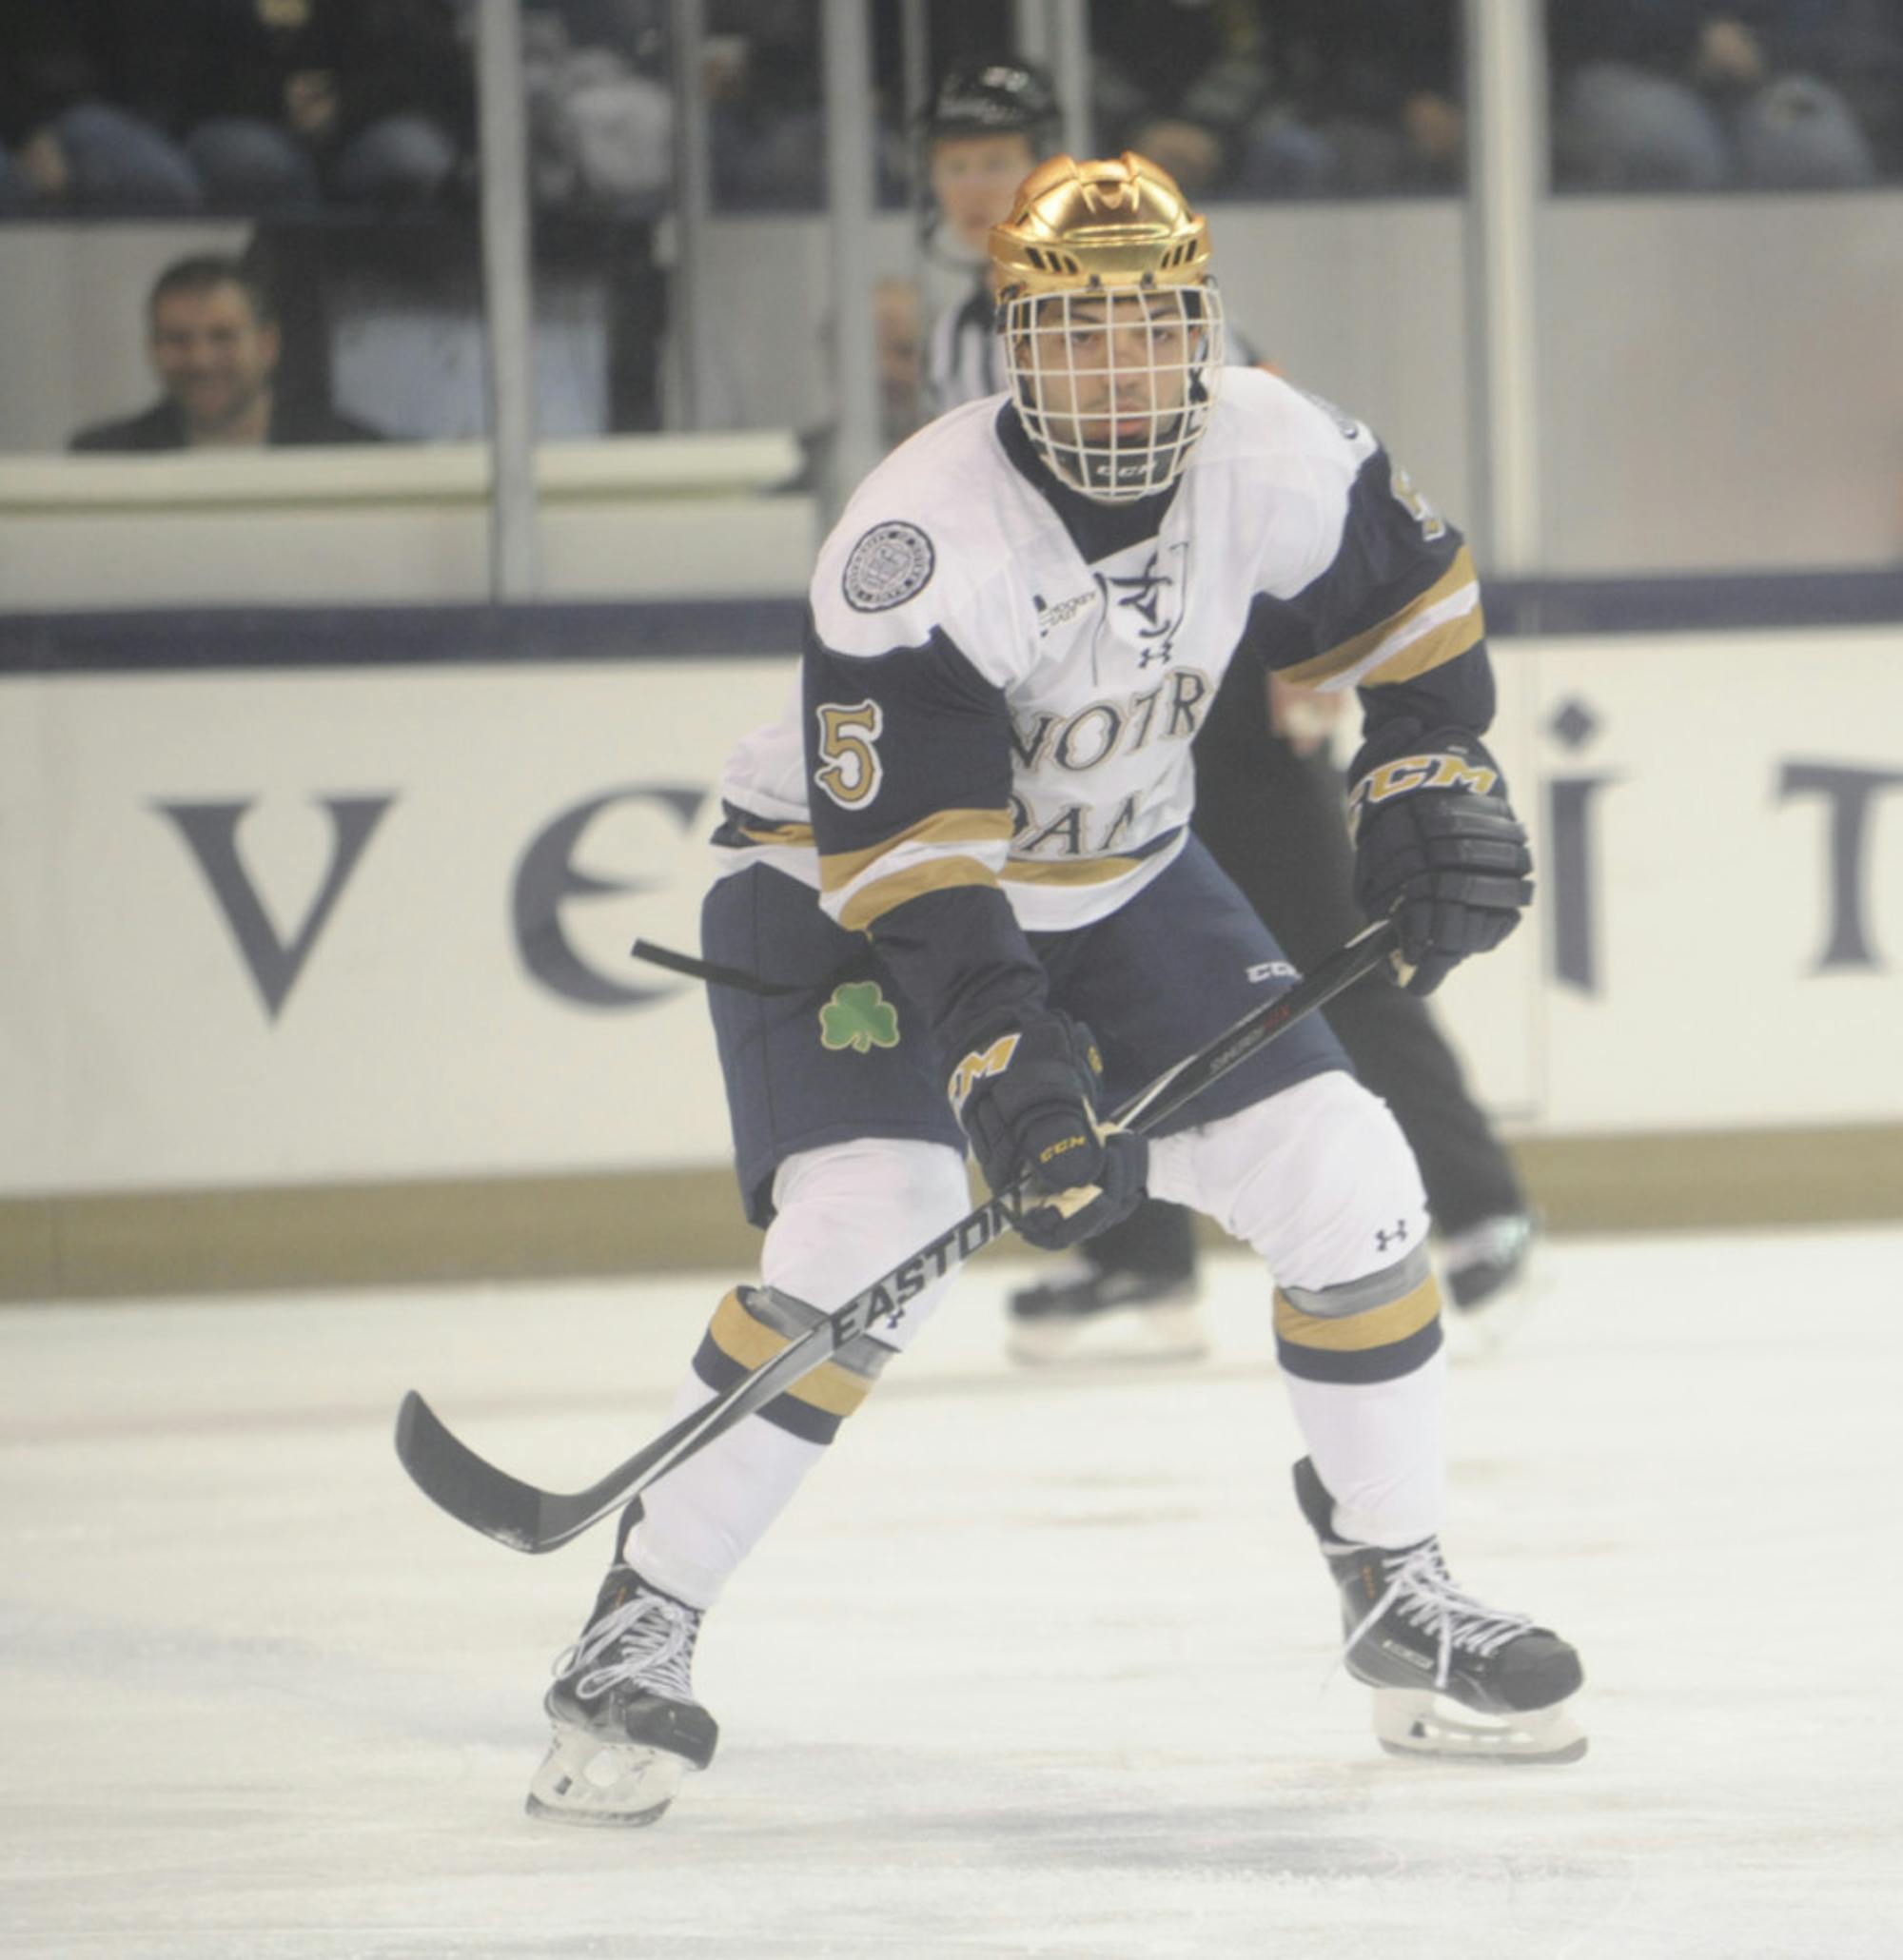 Irish senior defenseman Robbie Russo awaits a pass during Notre Dame’s loss to Waterloo on Sunday at Compton Family Ice Arena.